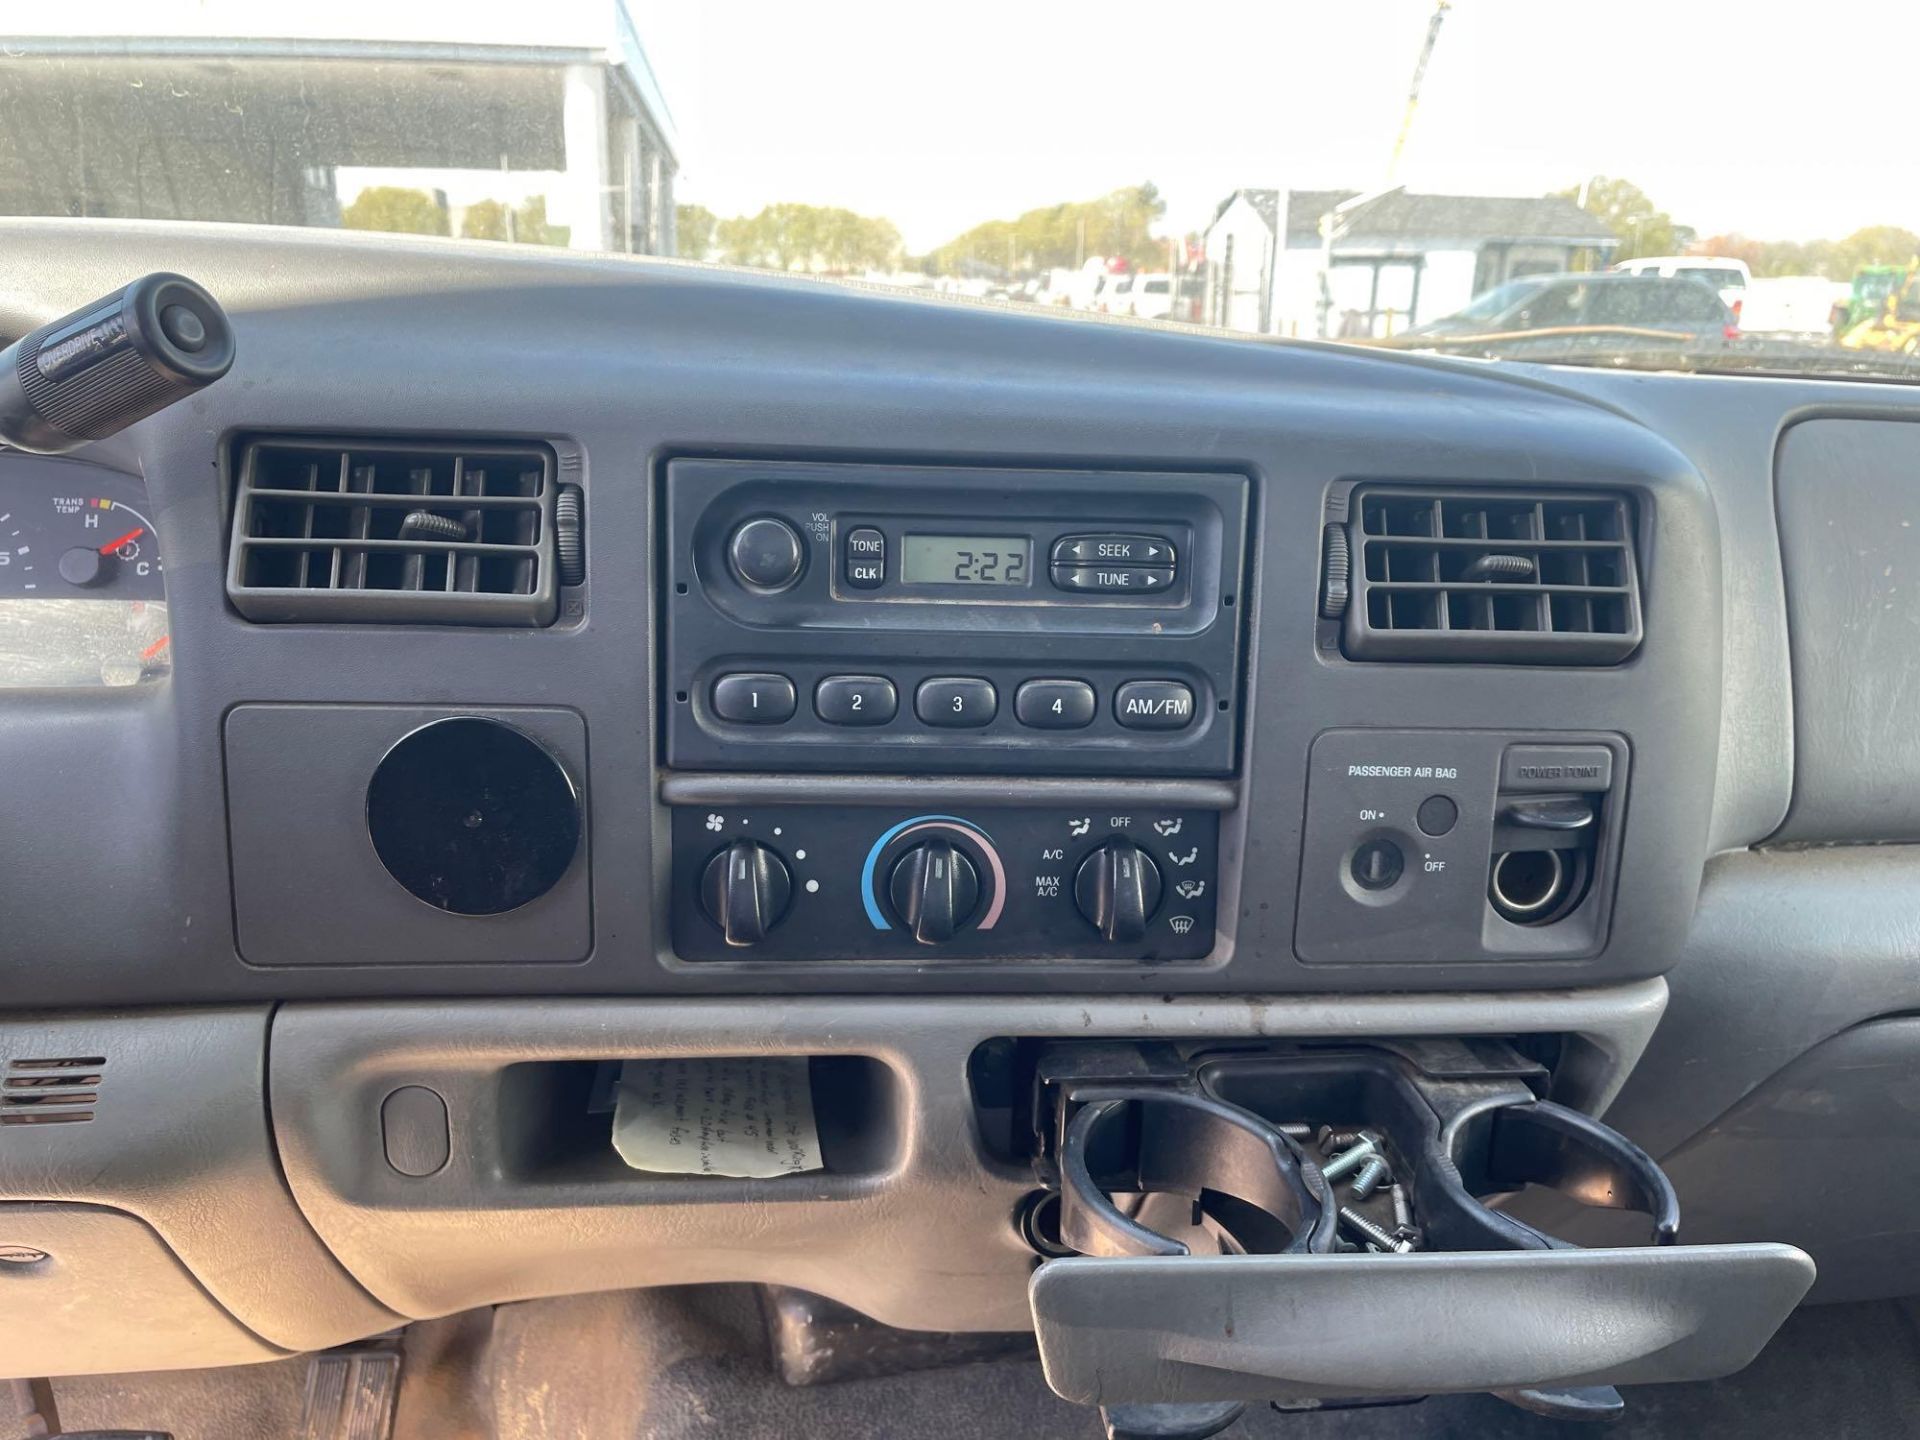 2002 Ford F250 Pickup Truck - Image 9 of 20